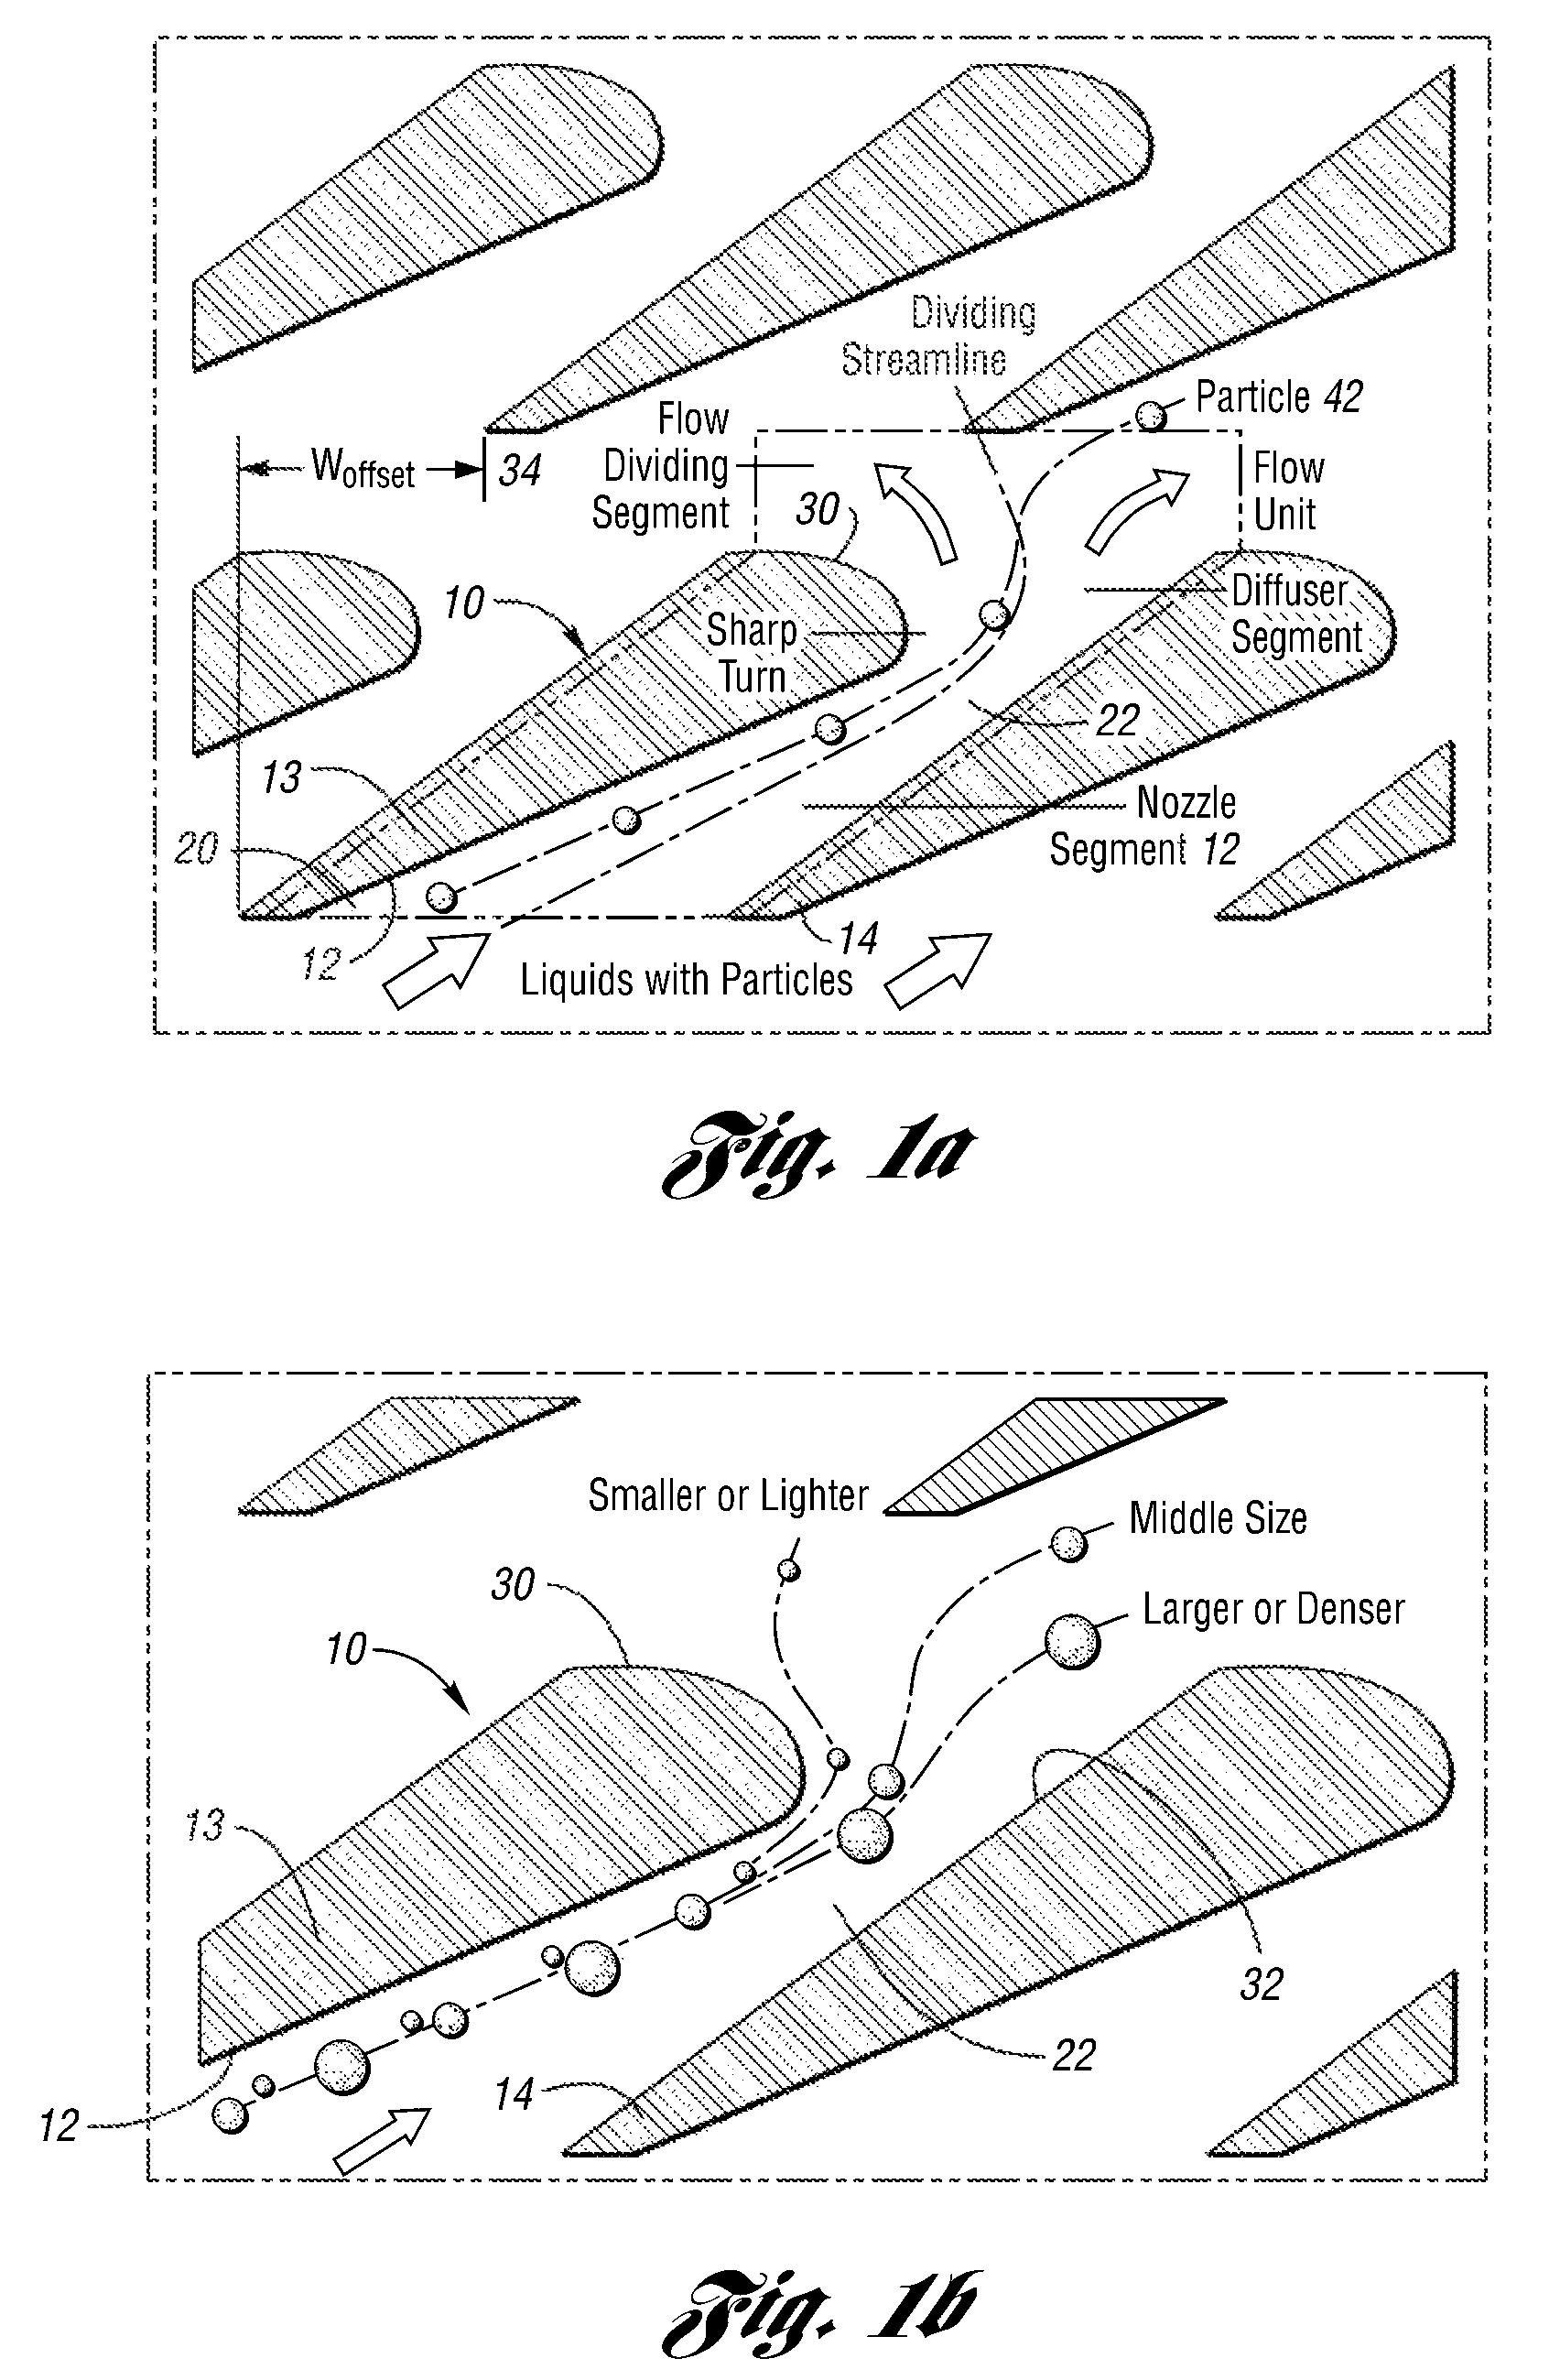 Device for separating and concentrating microfluidic particles